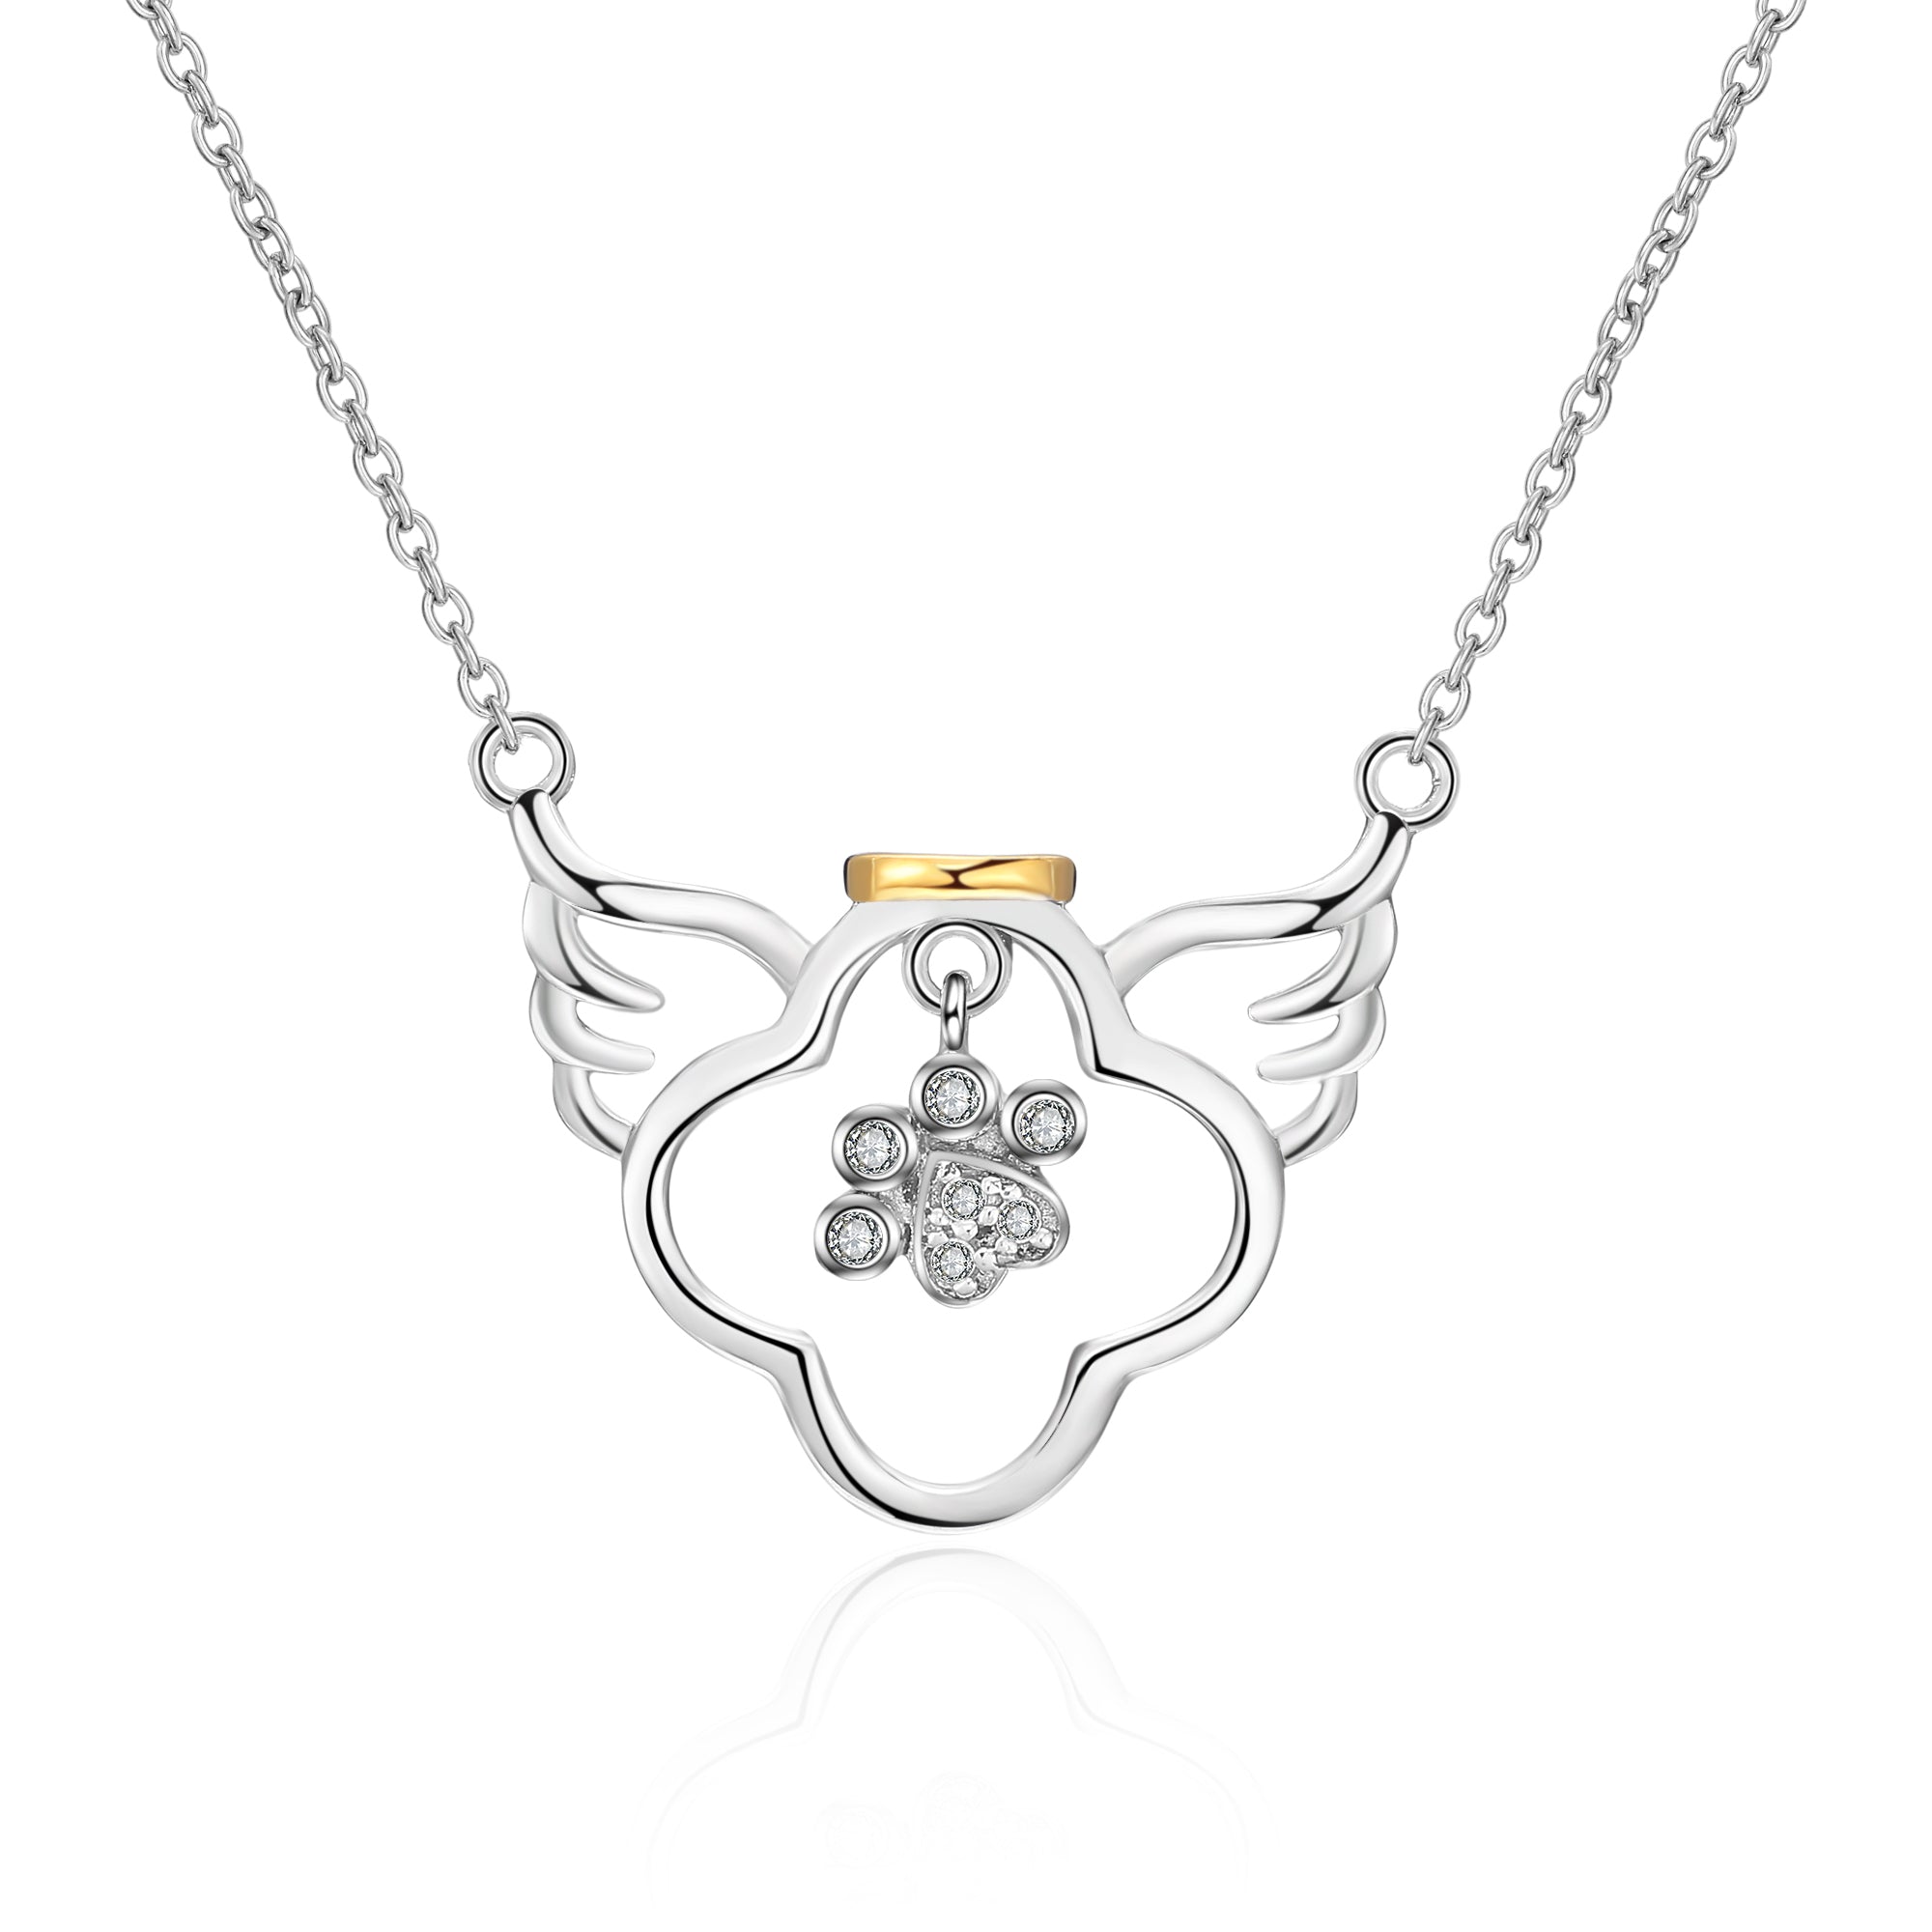 Bottle Angel Wings Zirconia Necklace Pendant Angle Wings Necklace